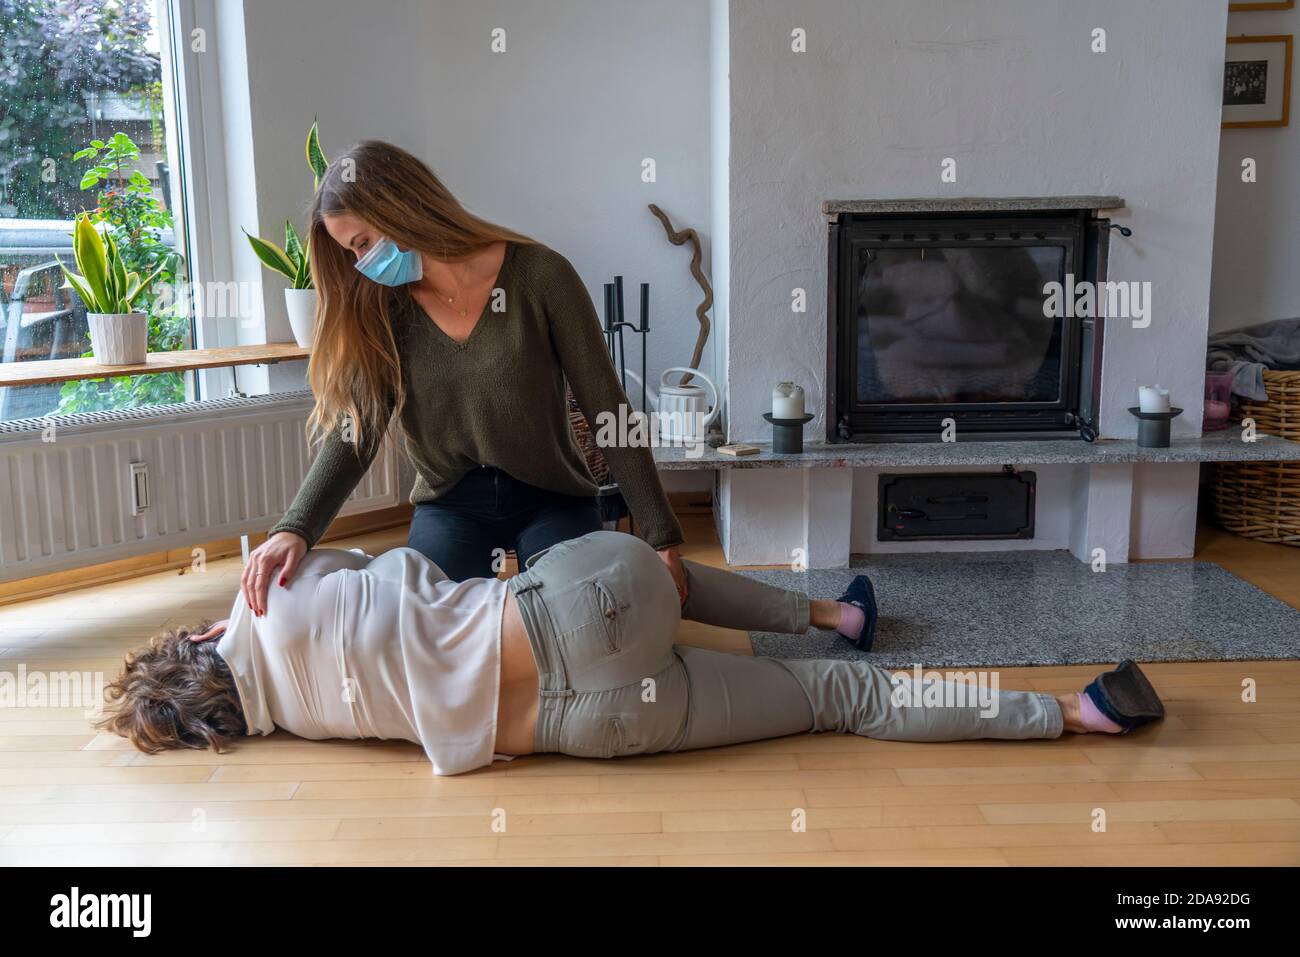 First aid measures under corona conditions, stable lateral position, after an accident in the home, with a mouth and nose mask, when first aid is give Stock Photo